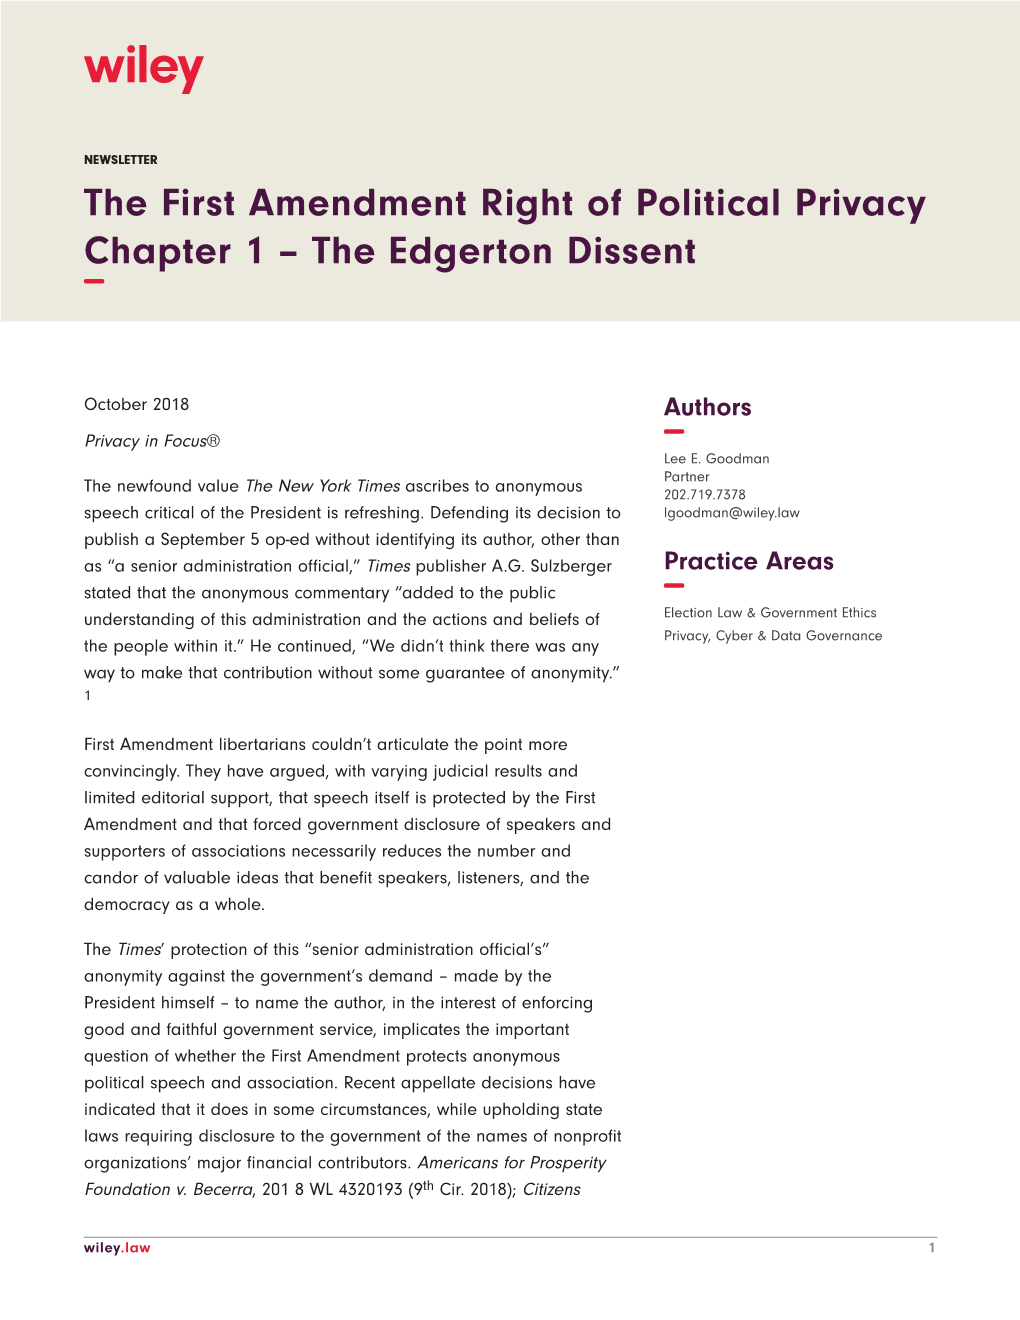 The First Amendment Right of Political Privacy Chapter 1 – the Edgerton Dissent −